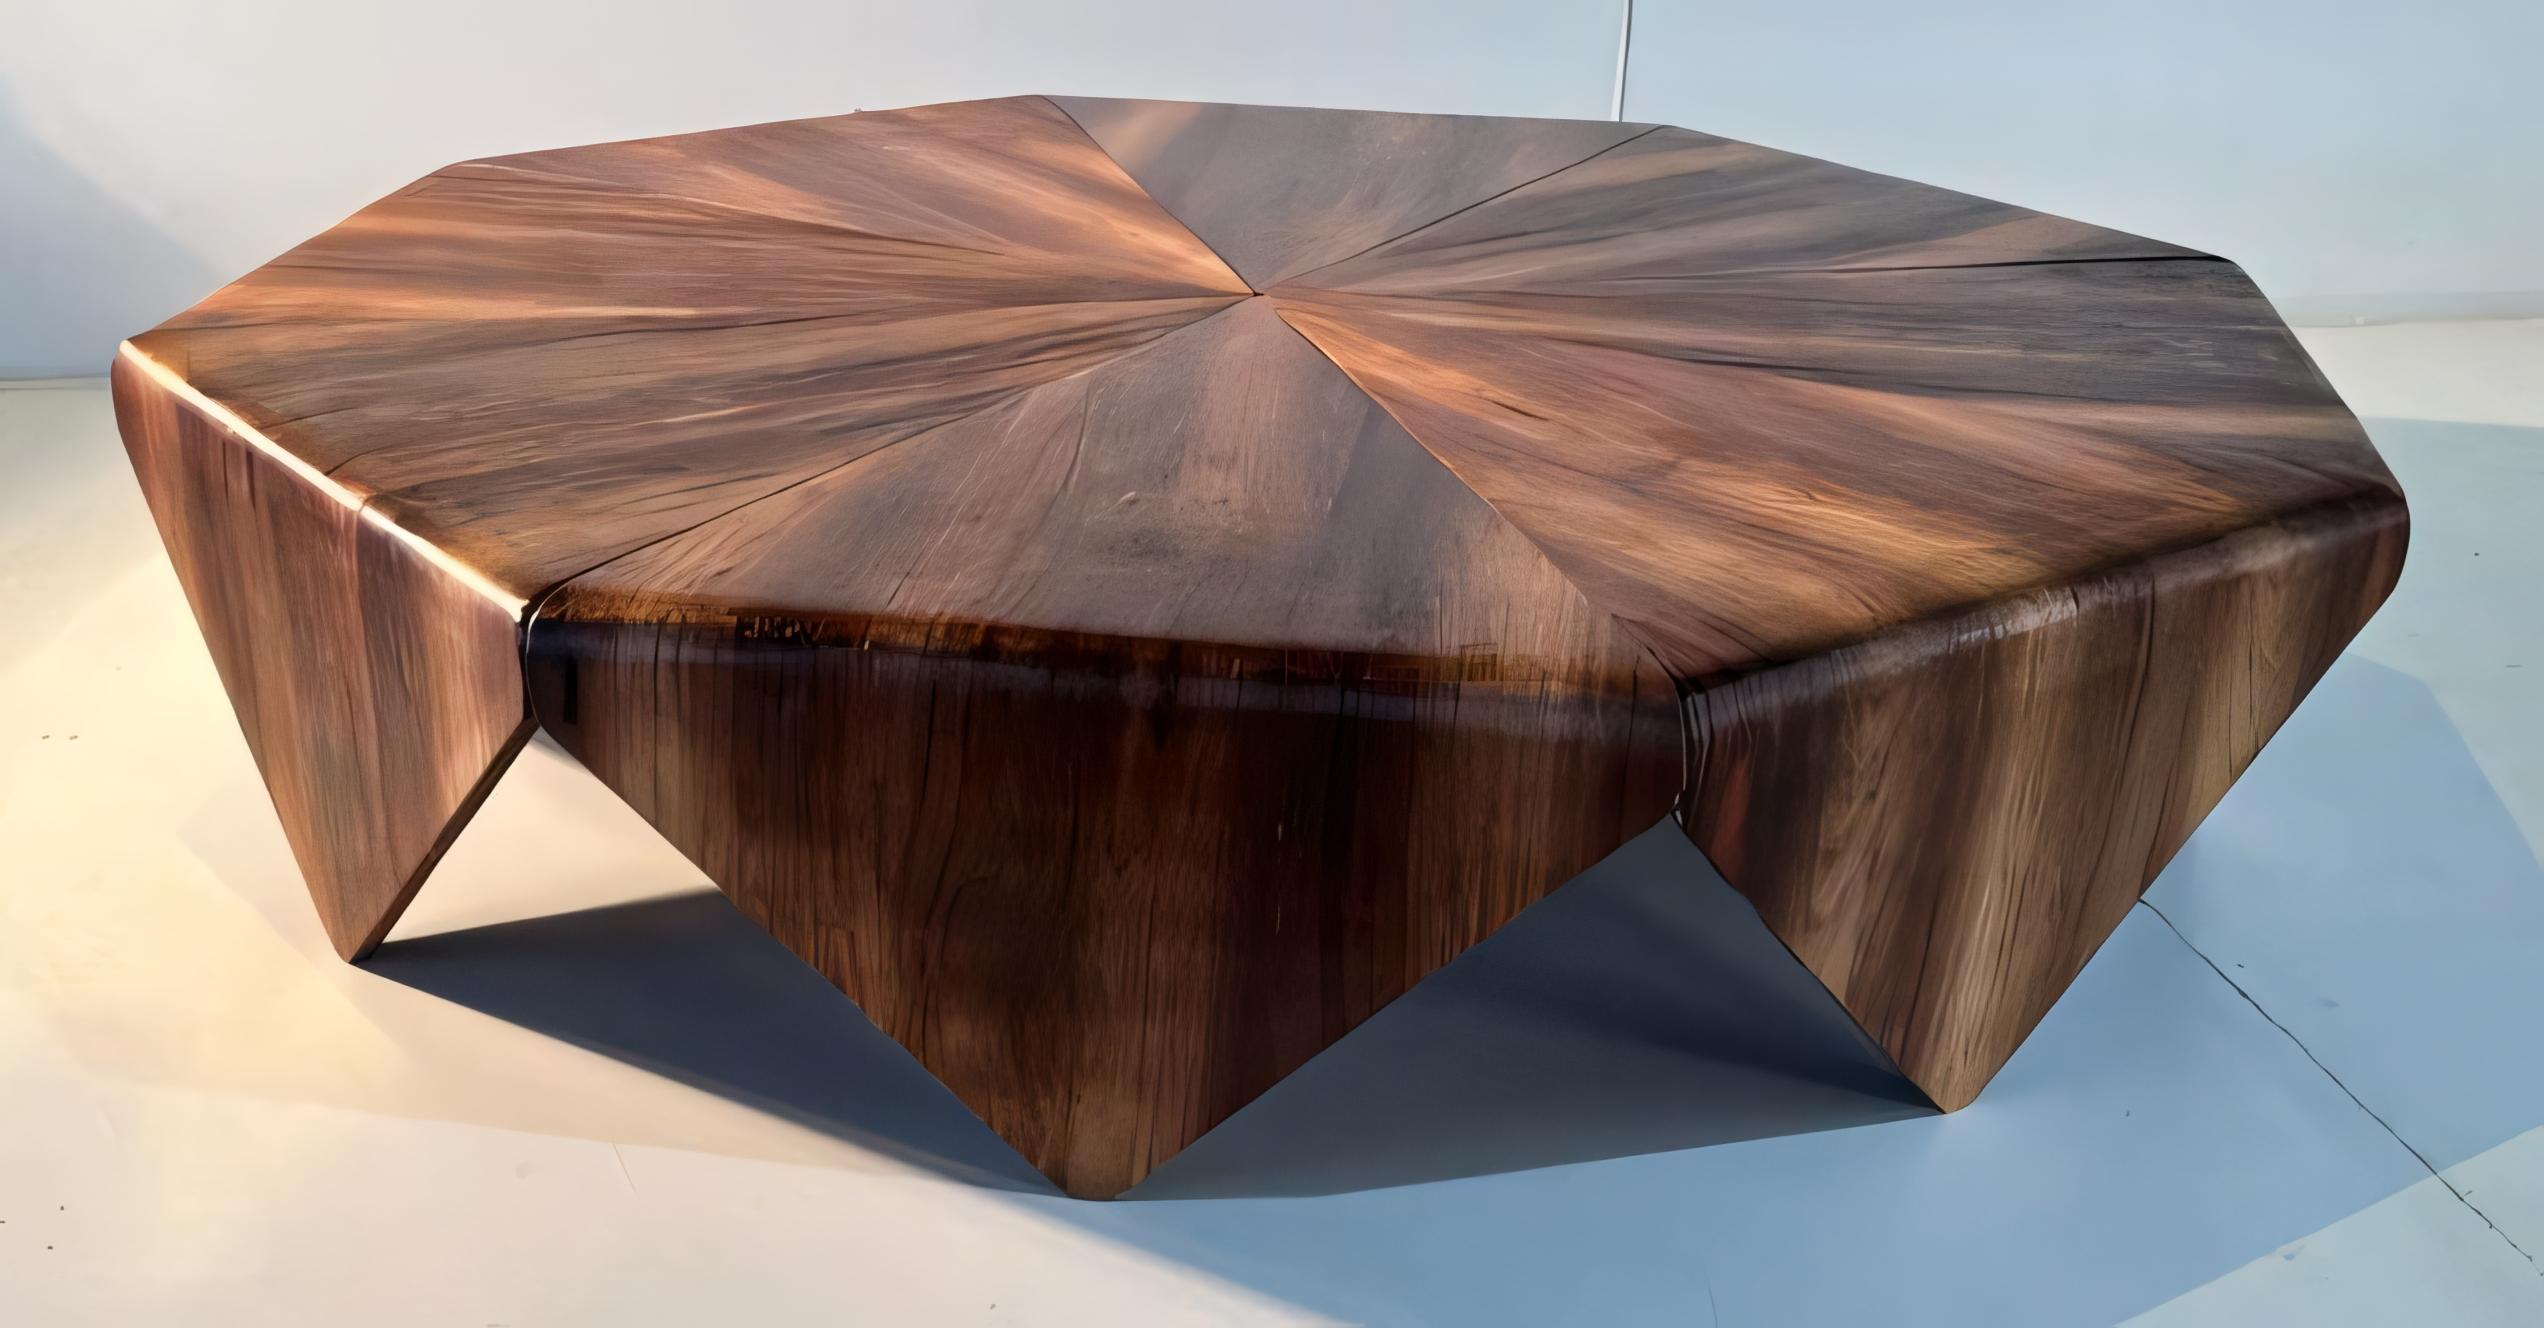 Delicate and sophisticated, the Petalas CoffeeTable is one of Jorge Zalszupin's most famous pieces.
The curvature, which defies wood structures, is brilliantly reminiscent of the petals of a flower. The structure
of the table is made of  hardwood,